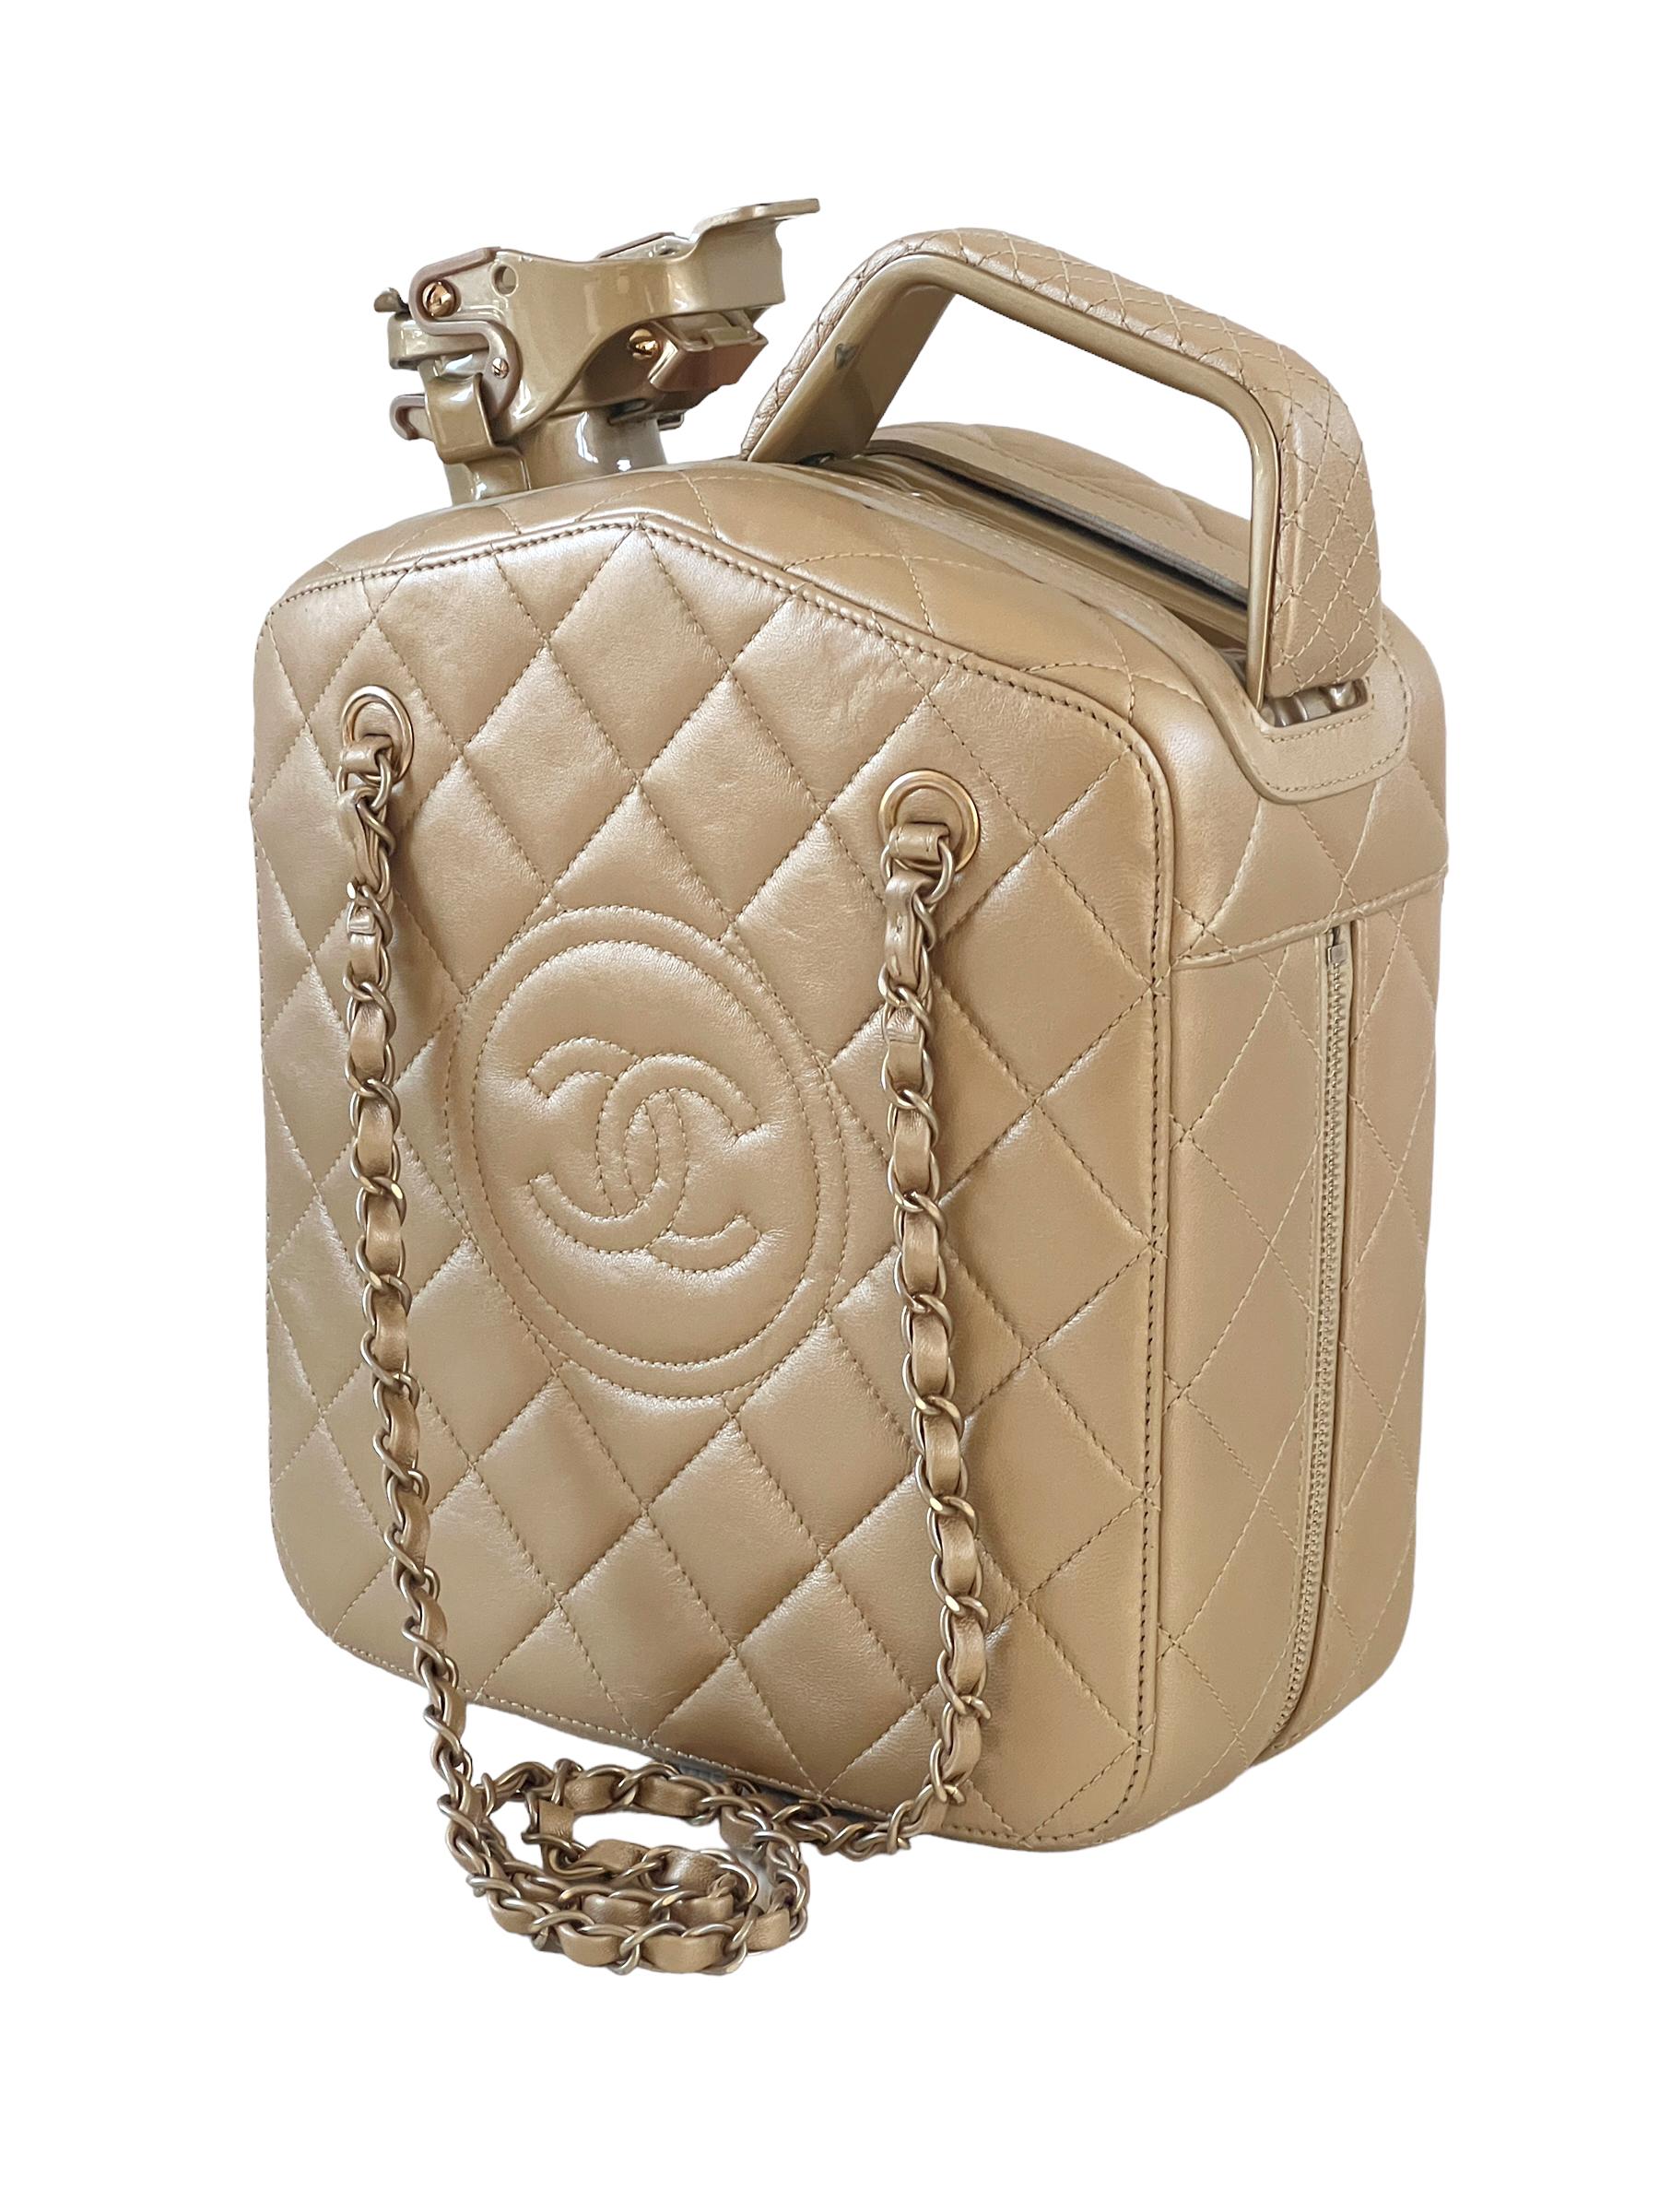 Chanel 2015 Paris-Dubai Nights Gas Tank Jerry Can Accessory Bag

Rare Collectors Bag in very good condition / Designed by Karl Lagerfeld

In very good condition with light signs of use

Height: 10